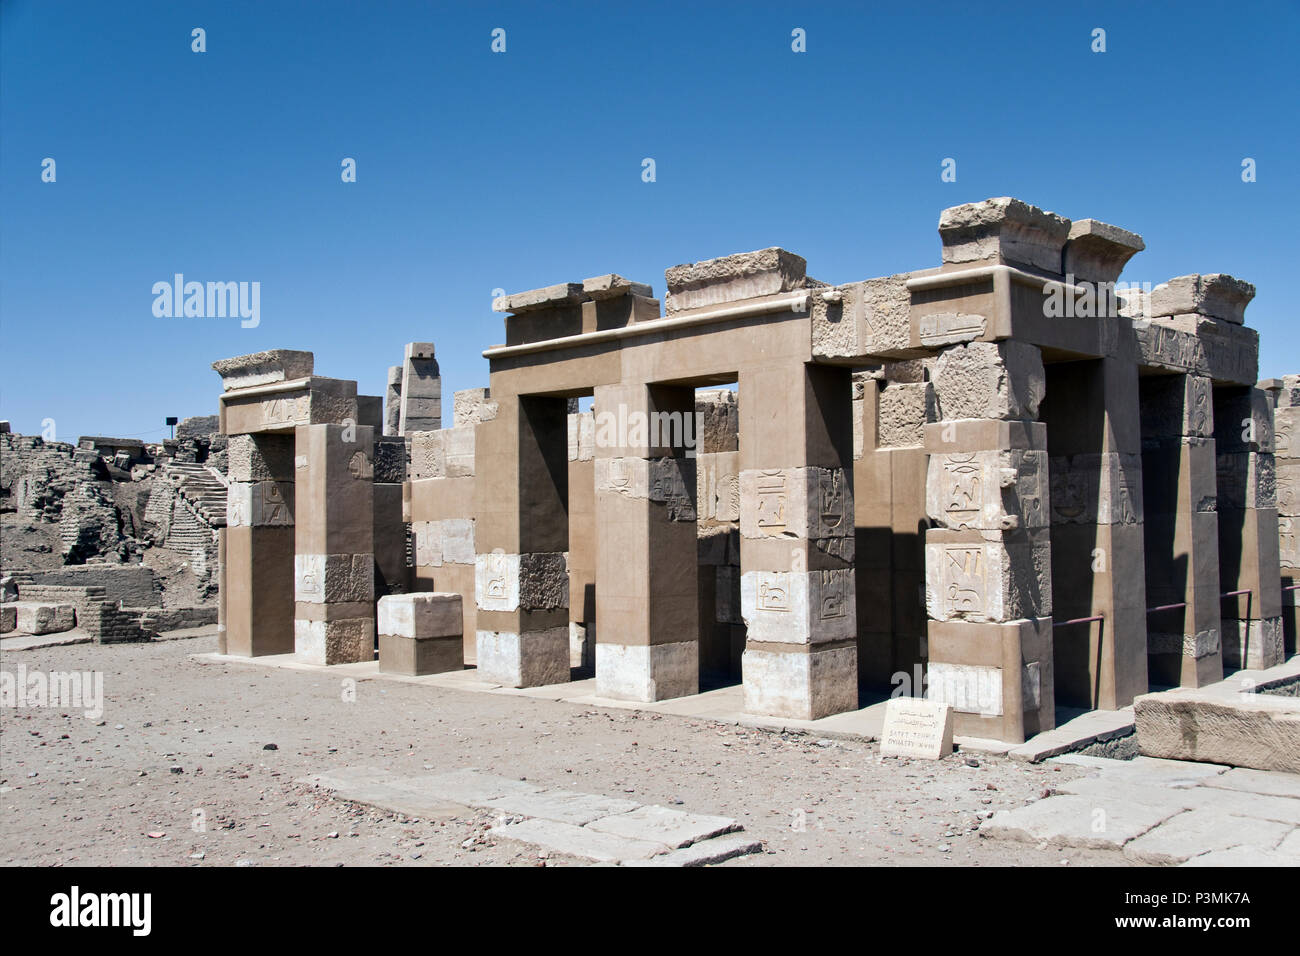 The Temple of Satet, dedicated to the goddess of the Nile inundation, Satet, on Elephantine Island at Aswan, Egypt. Stock Photo